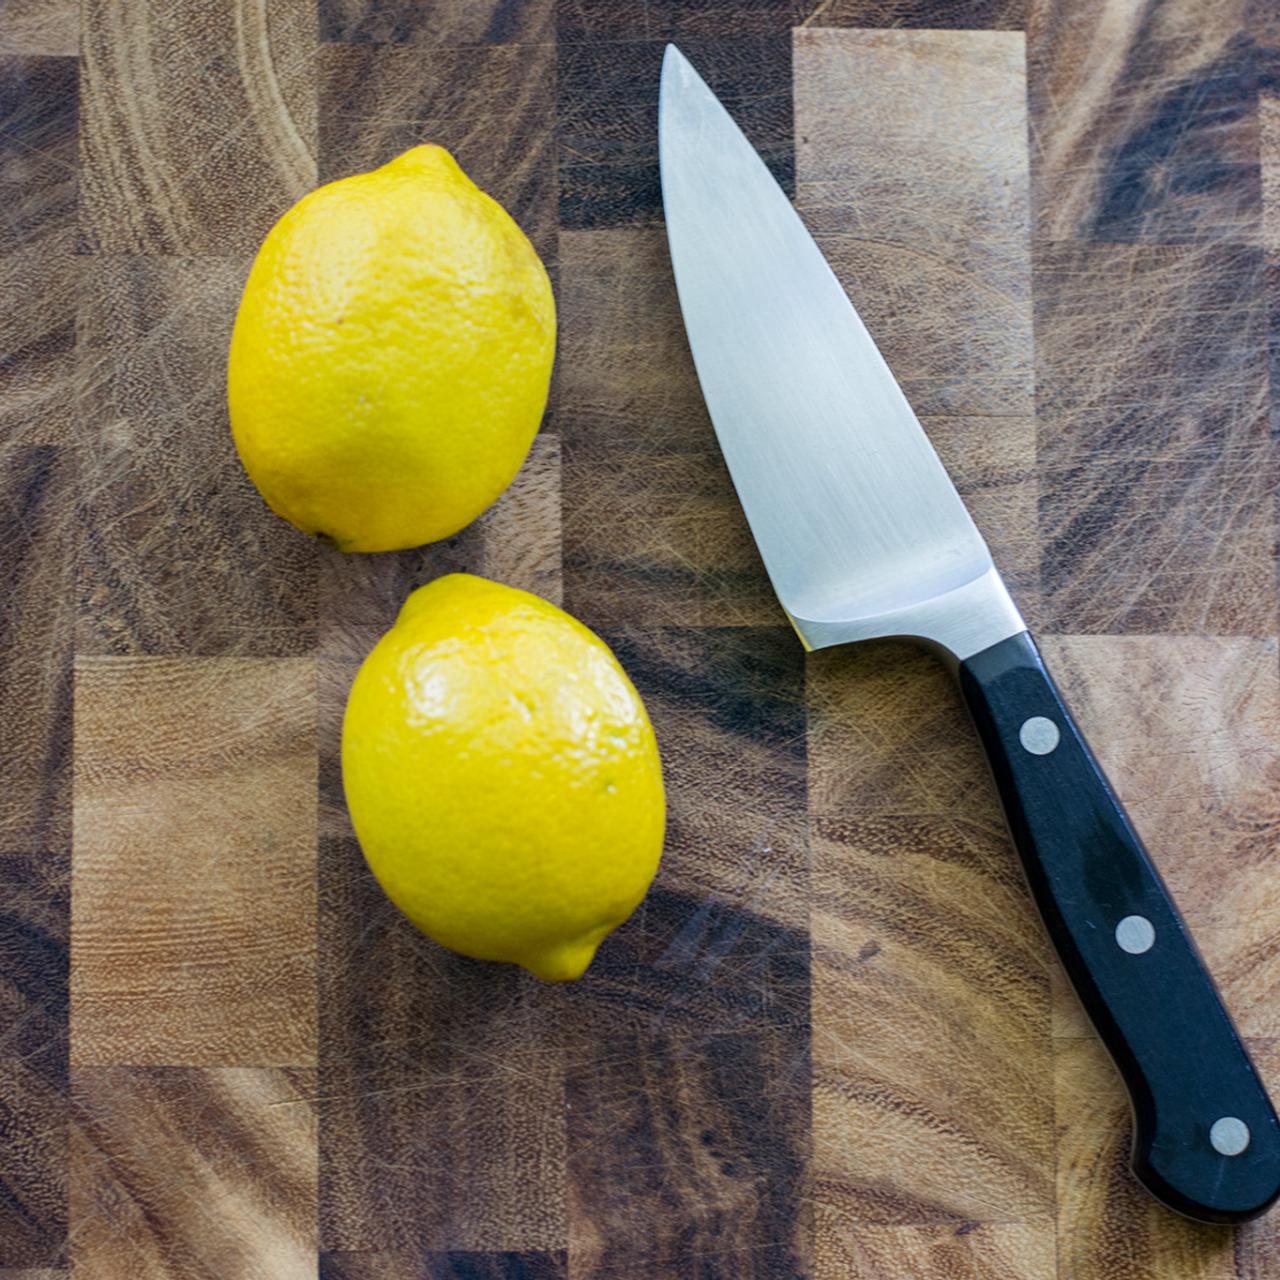 Tips for Cleaning Plastic and Wooden Cutting Boards With Lemon